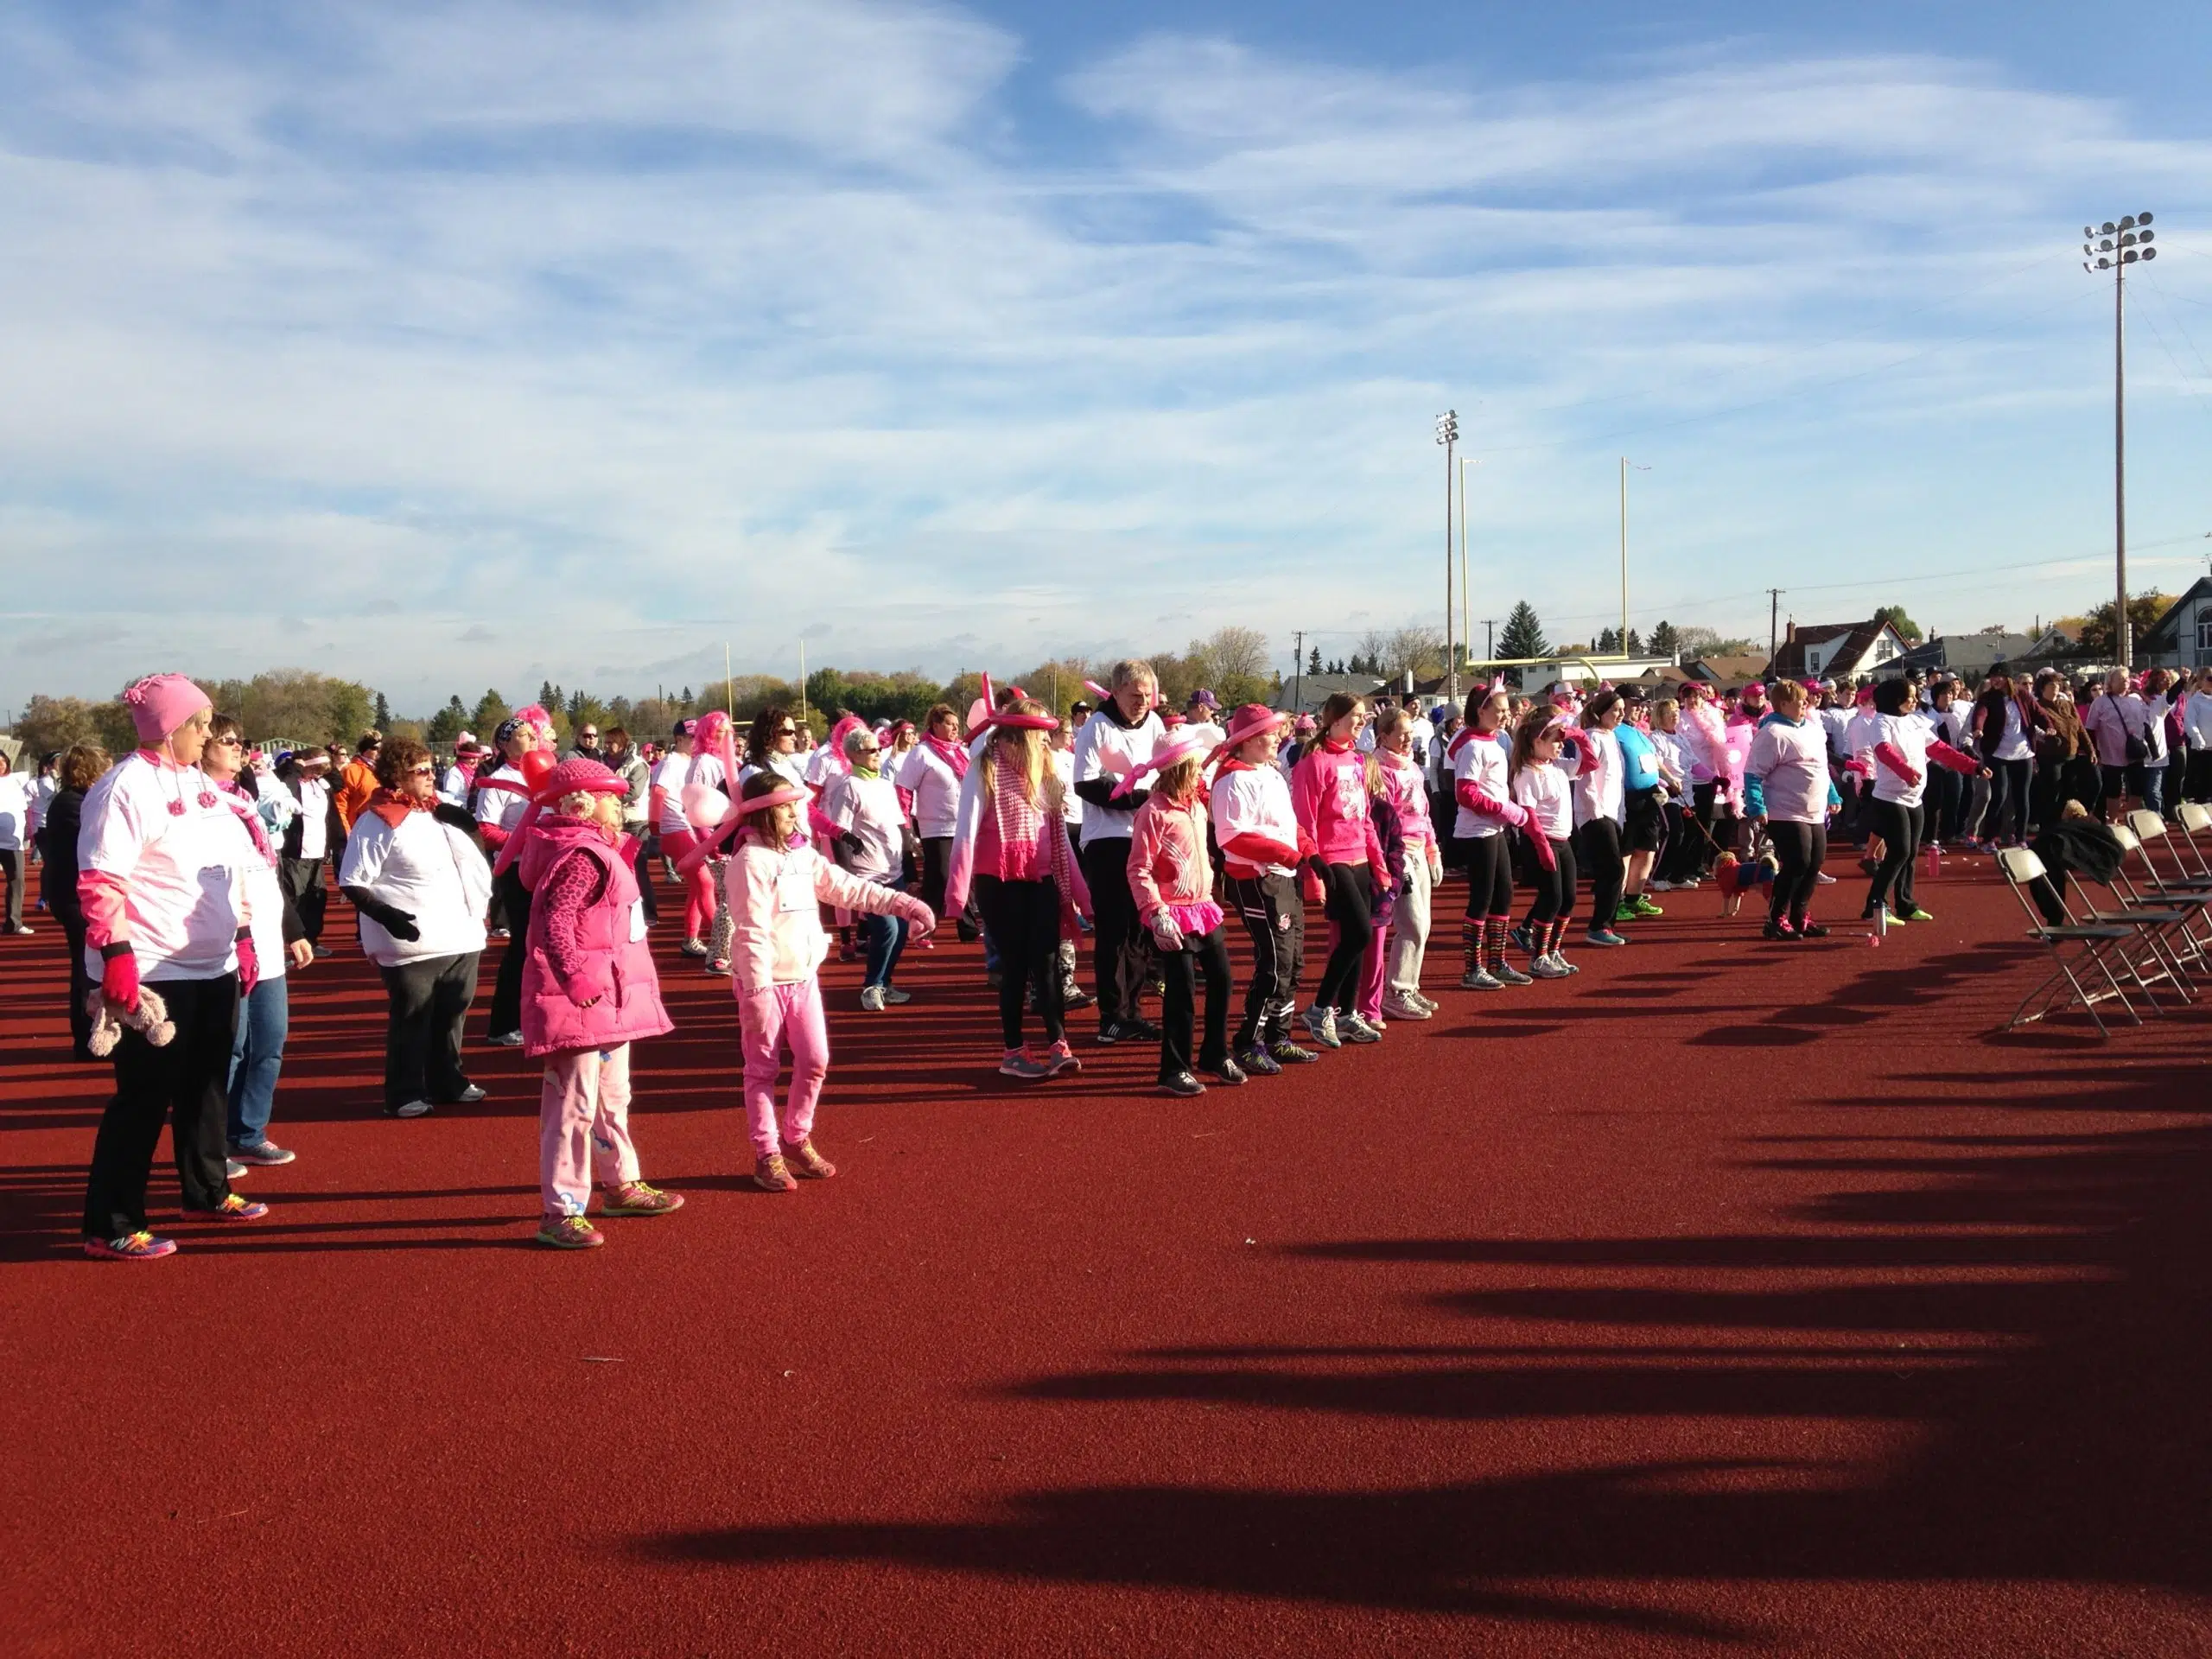 500 Expected To Run For The Cure